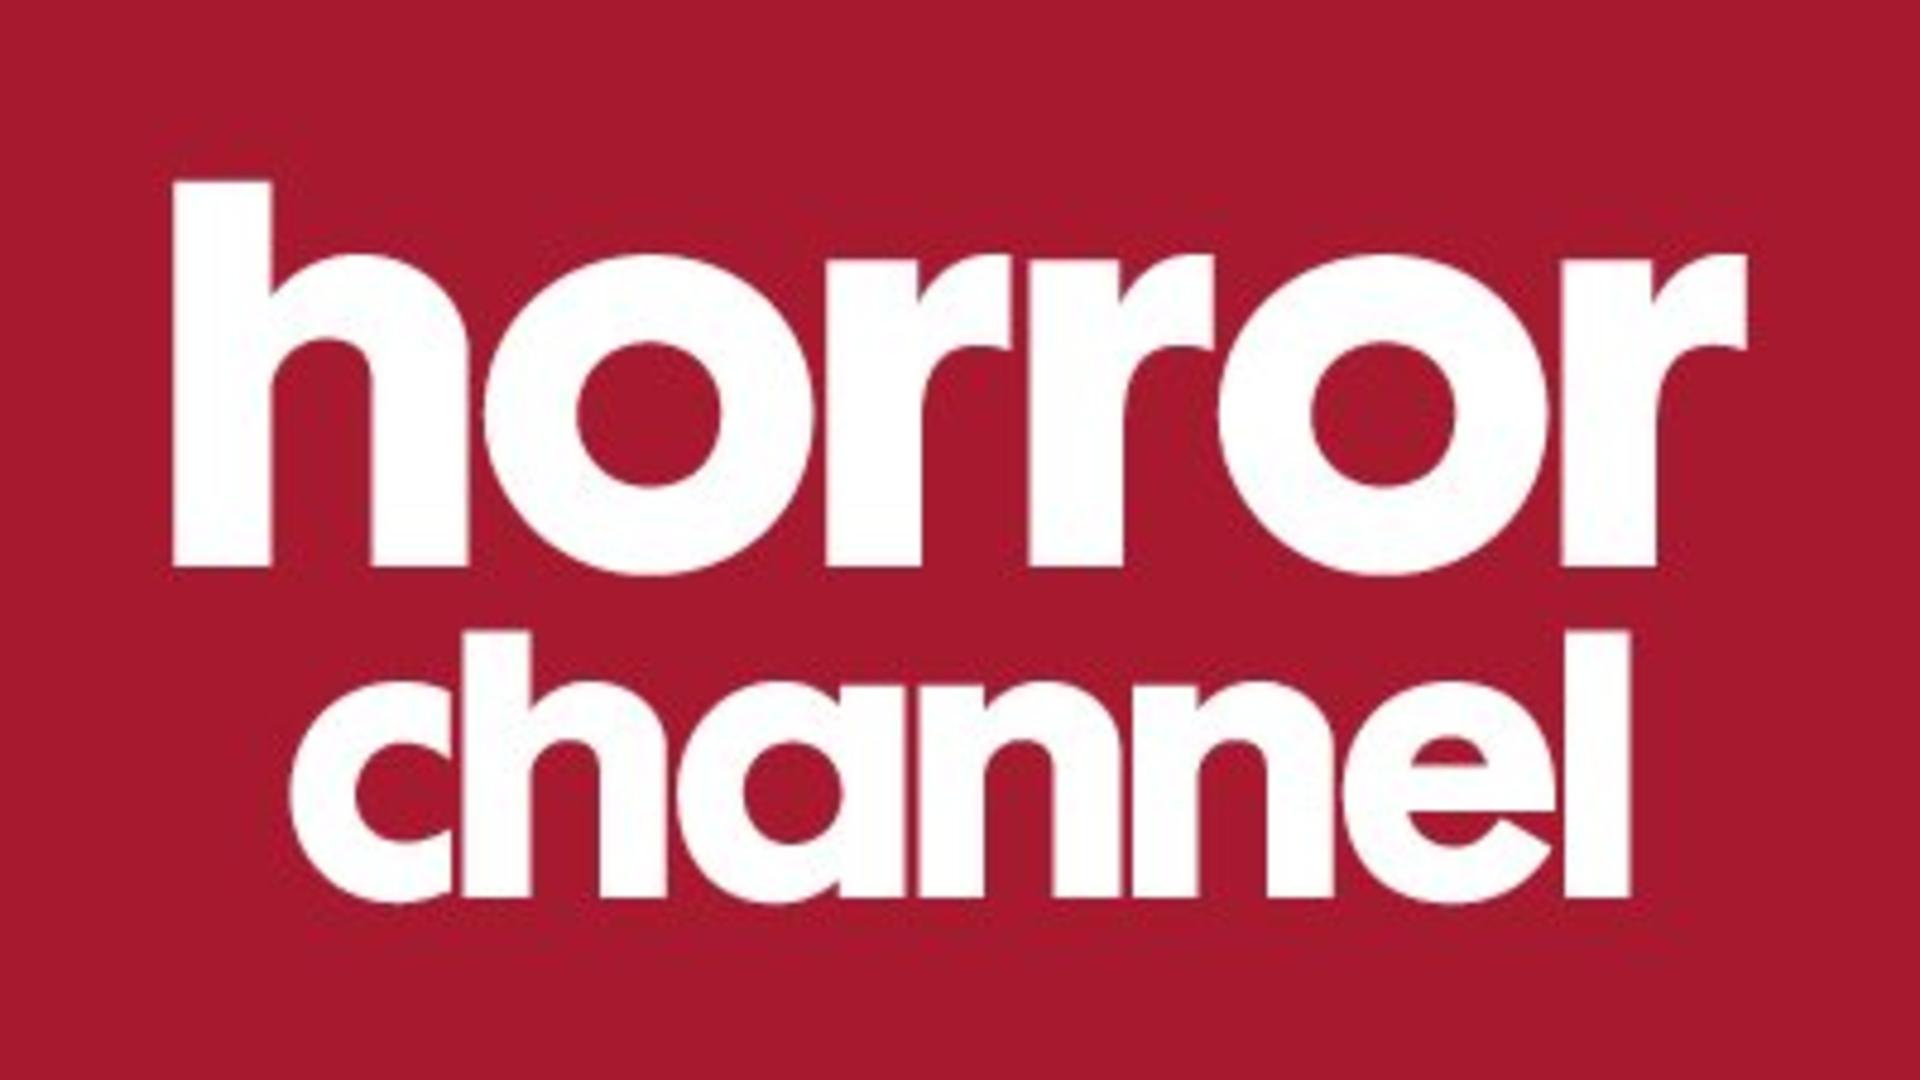 NIGHTMARES AT 9PM - HORROR CHANNEL PROMO